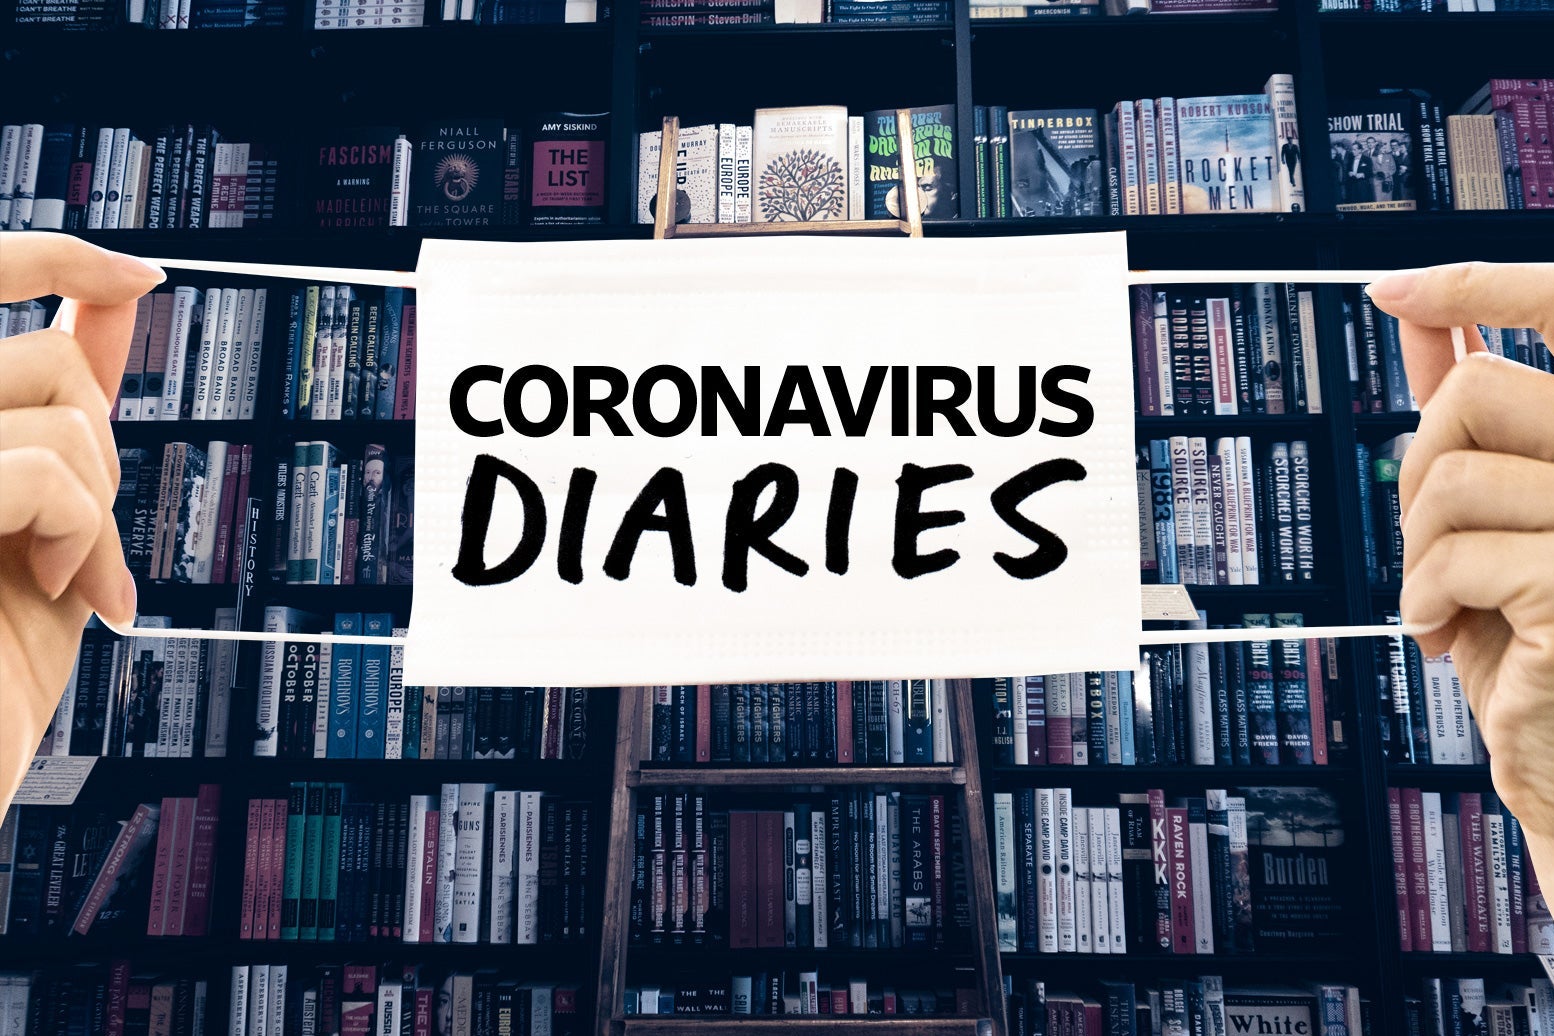 A bookshelf in a bookstore with a mask that says "Coronavirus Diaries" in front of it.